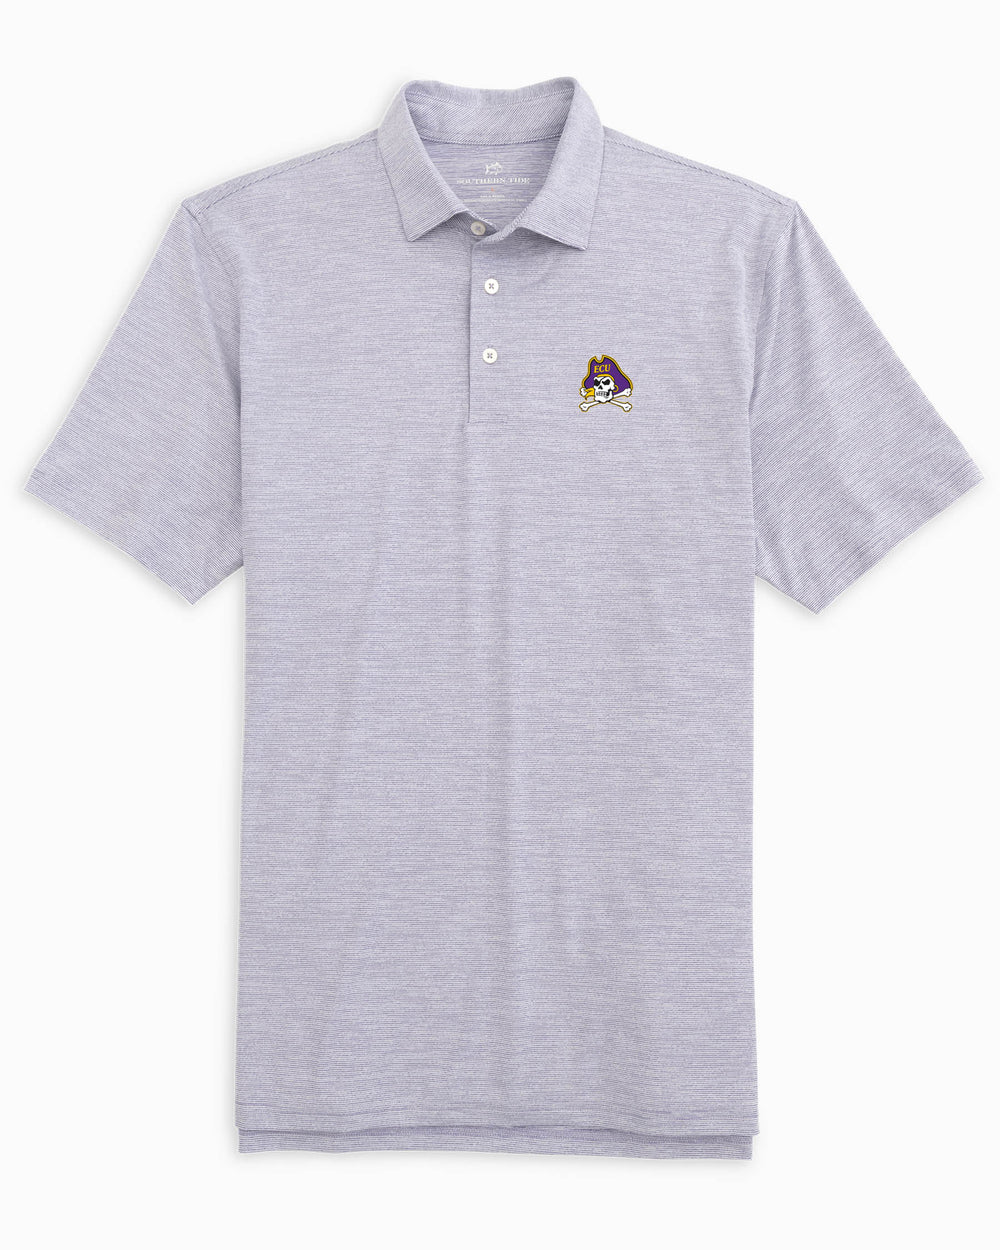 The front of the Men's East Carolina Driver Spacedye Polo Shirt by Southern Tide - Regal Purple